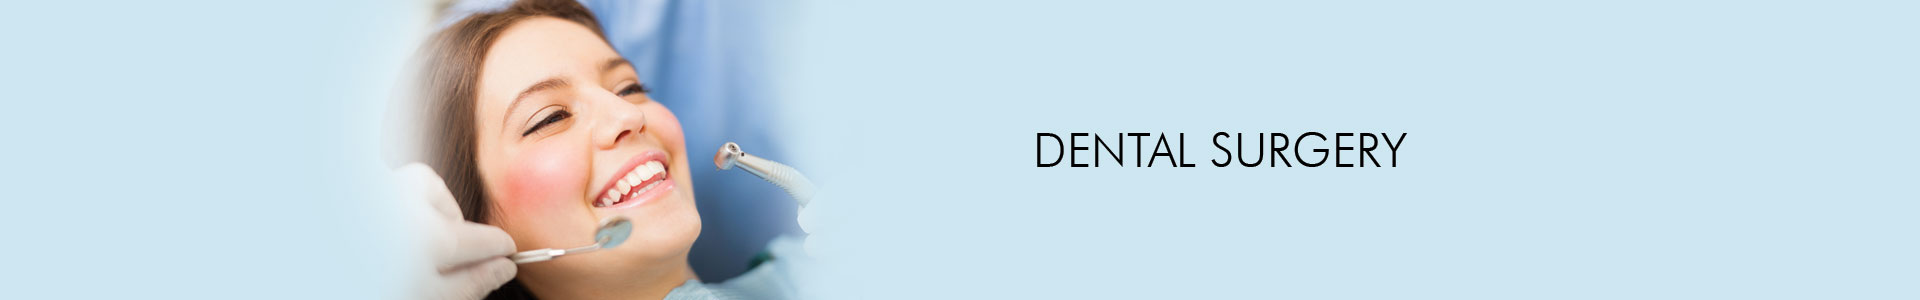 dental surgery in India